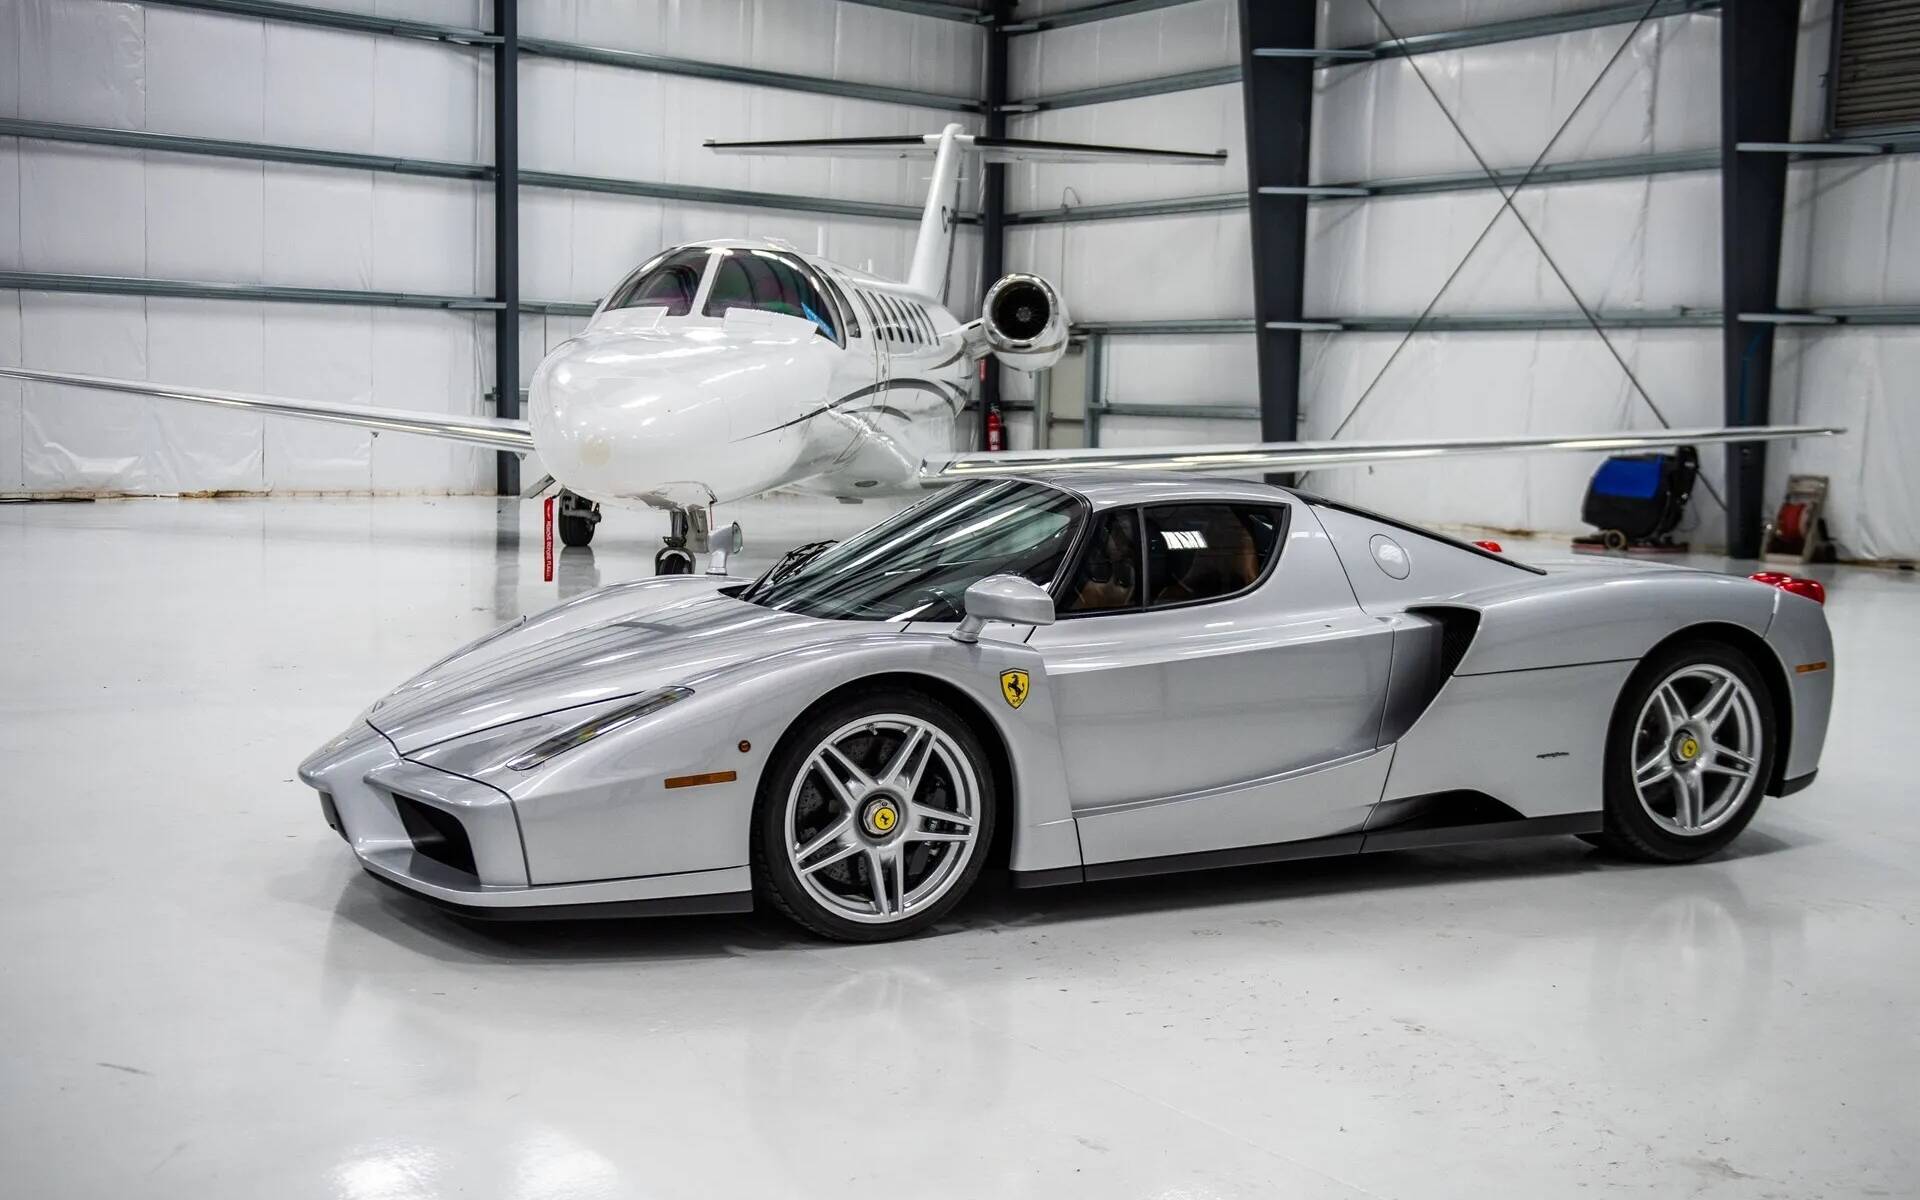 Ferrari Enzo For Sale in Ontario Has Been Registered or Unwrapped The